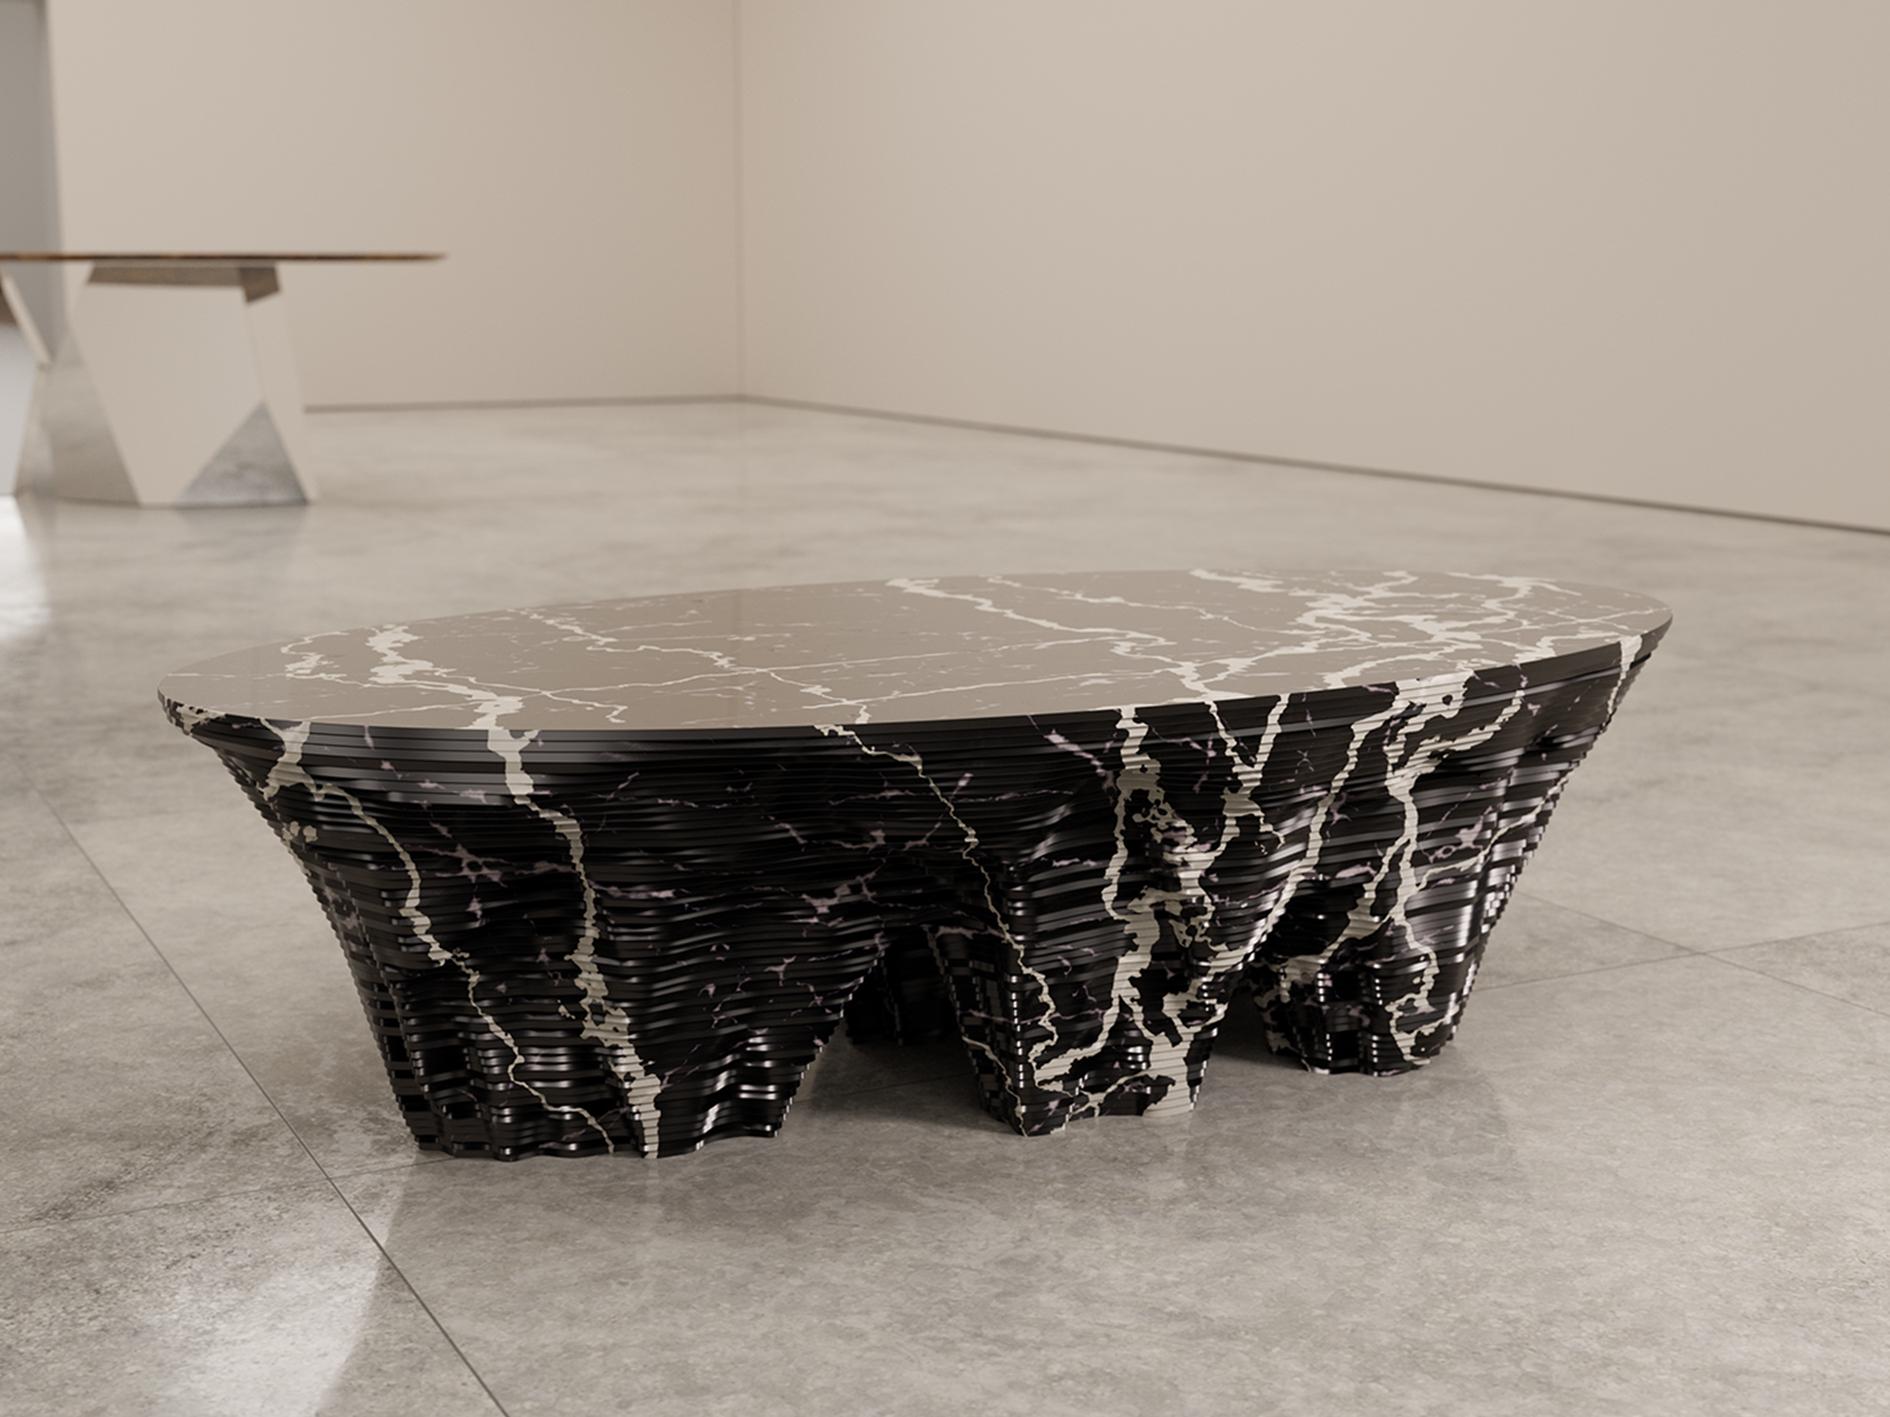 A stylish piece of modern, statement-furniture design from British designer Christopher Duffy.  A unique marble coffee table for the modern home.

For the Monument valley coffee table Duffy London casts an eye across the American West and sandstone